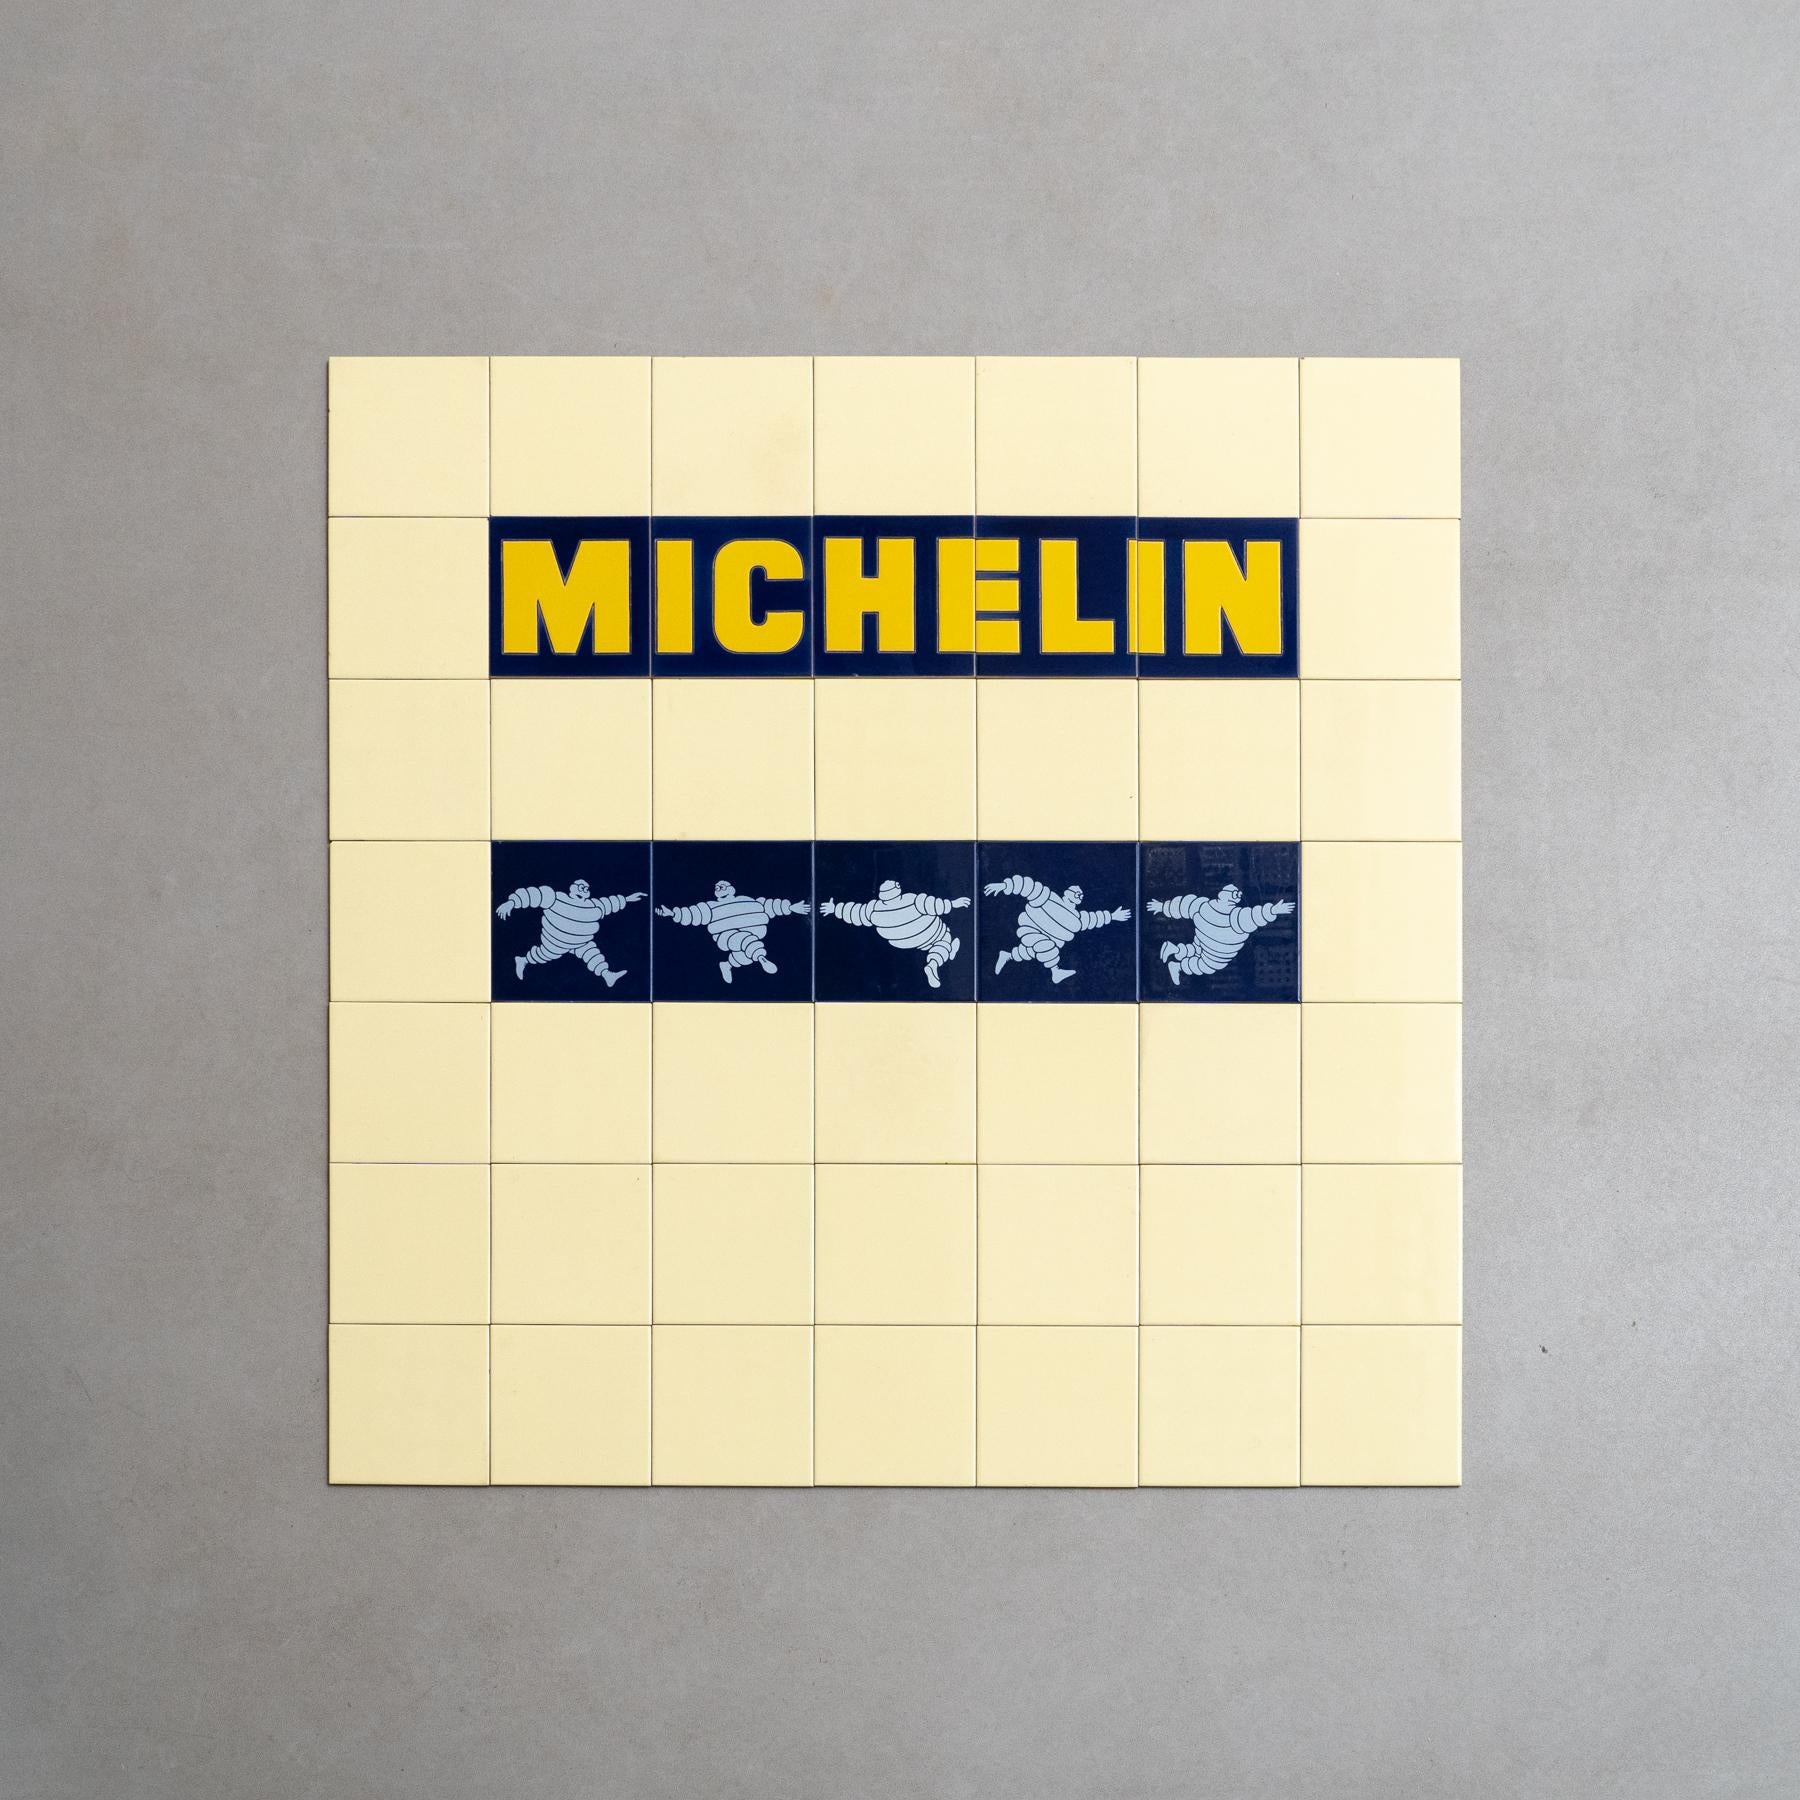 Dive into a nostalgic journey with this rare and unique large set of Michelin Man tiles, crafted by an unknown manufacturer in Spain circa 1960. The set comprises the complete series of 5 iconic Michelin Blue Tiles, surrounded by original yellow